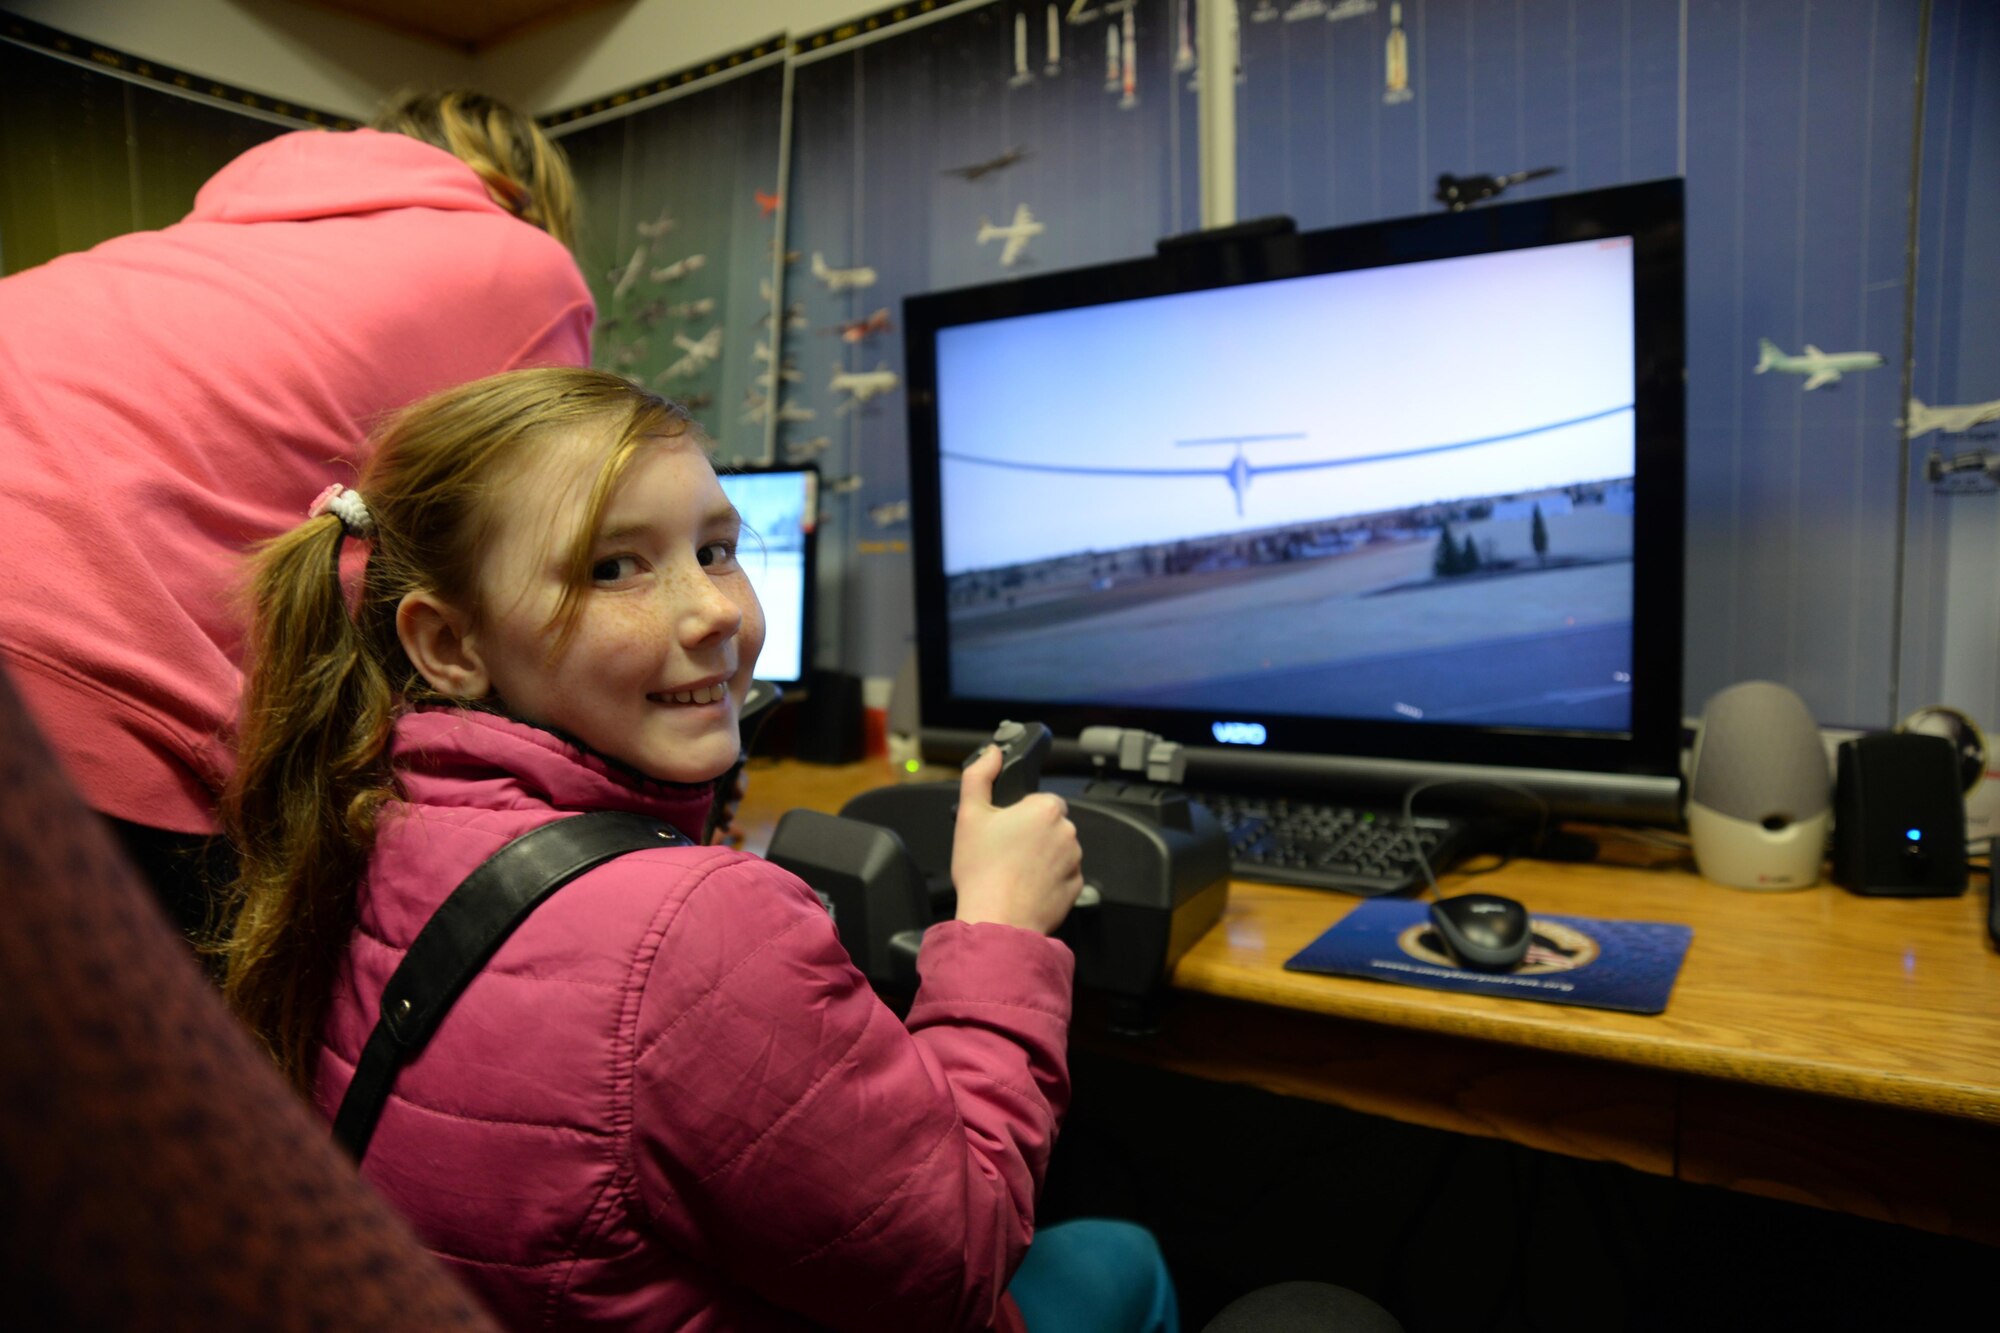 Julianna Gorton, daughter of retired U.S. Air Force Master Sgt. Richard Gorton and Aime Gorton, hones her glider skills at the Curtis E. LeMay Composite Squadron's open house March 30 at their squadron headquarters. The event showcased a new state-of-the-art cybersecurity and science, technology, engineering and mathematics (STEM) learning environment made possible by grants from a local corporate sponsor, the Offutt Officers’ Spouses’ Club and an anonymous donor.

About 56,000 members make up CAP, which celebrated 75 years of service on Dec. 1, 2016, and consists of eight geographical regions, composed of 52 separate wings, one in each state, and Washington D.C. and Puerto Rico. The organization operates a fleet of 550 aircraft and performs about 90 percent of continental U.S. inland search and rescue missions as tasked by the Air Force Rescue Coordination Center. CAP is credited with saving an average of 78 lives every year.